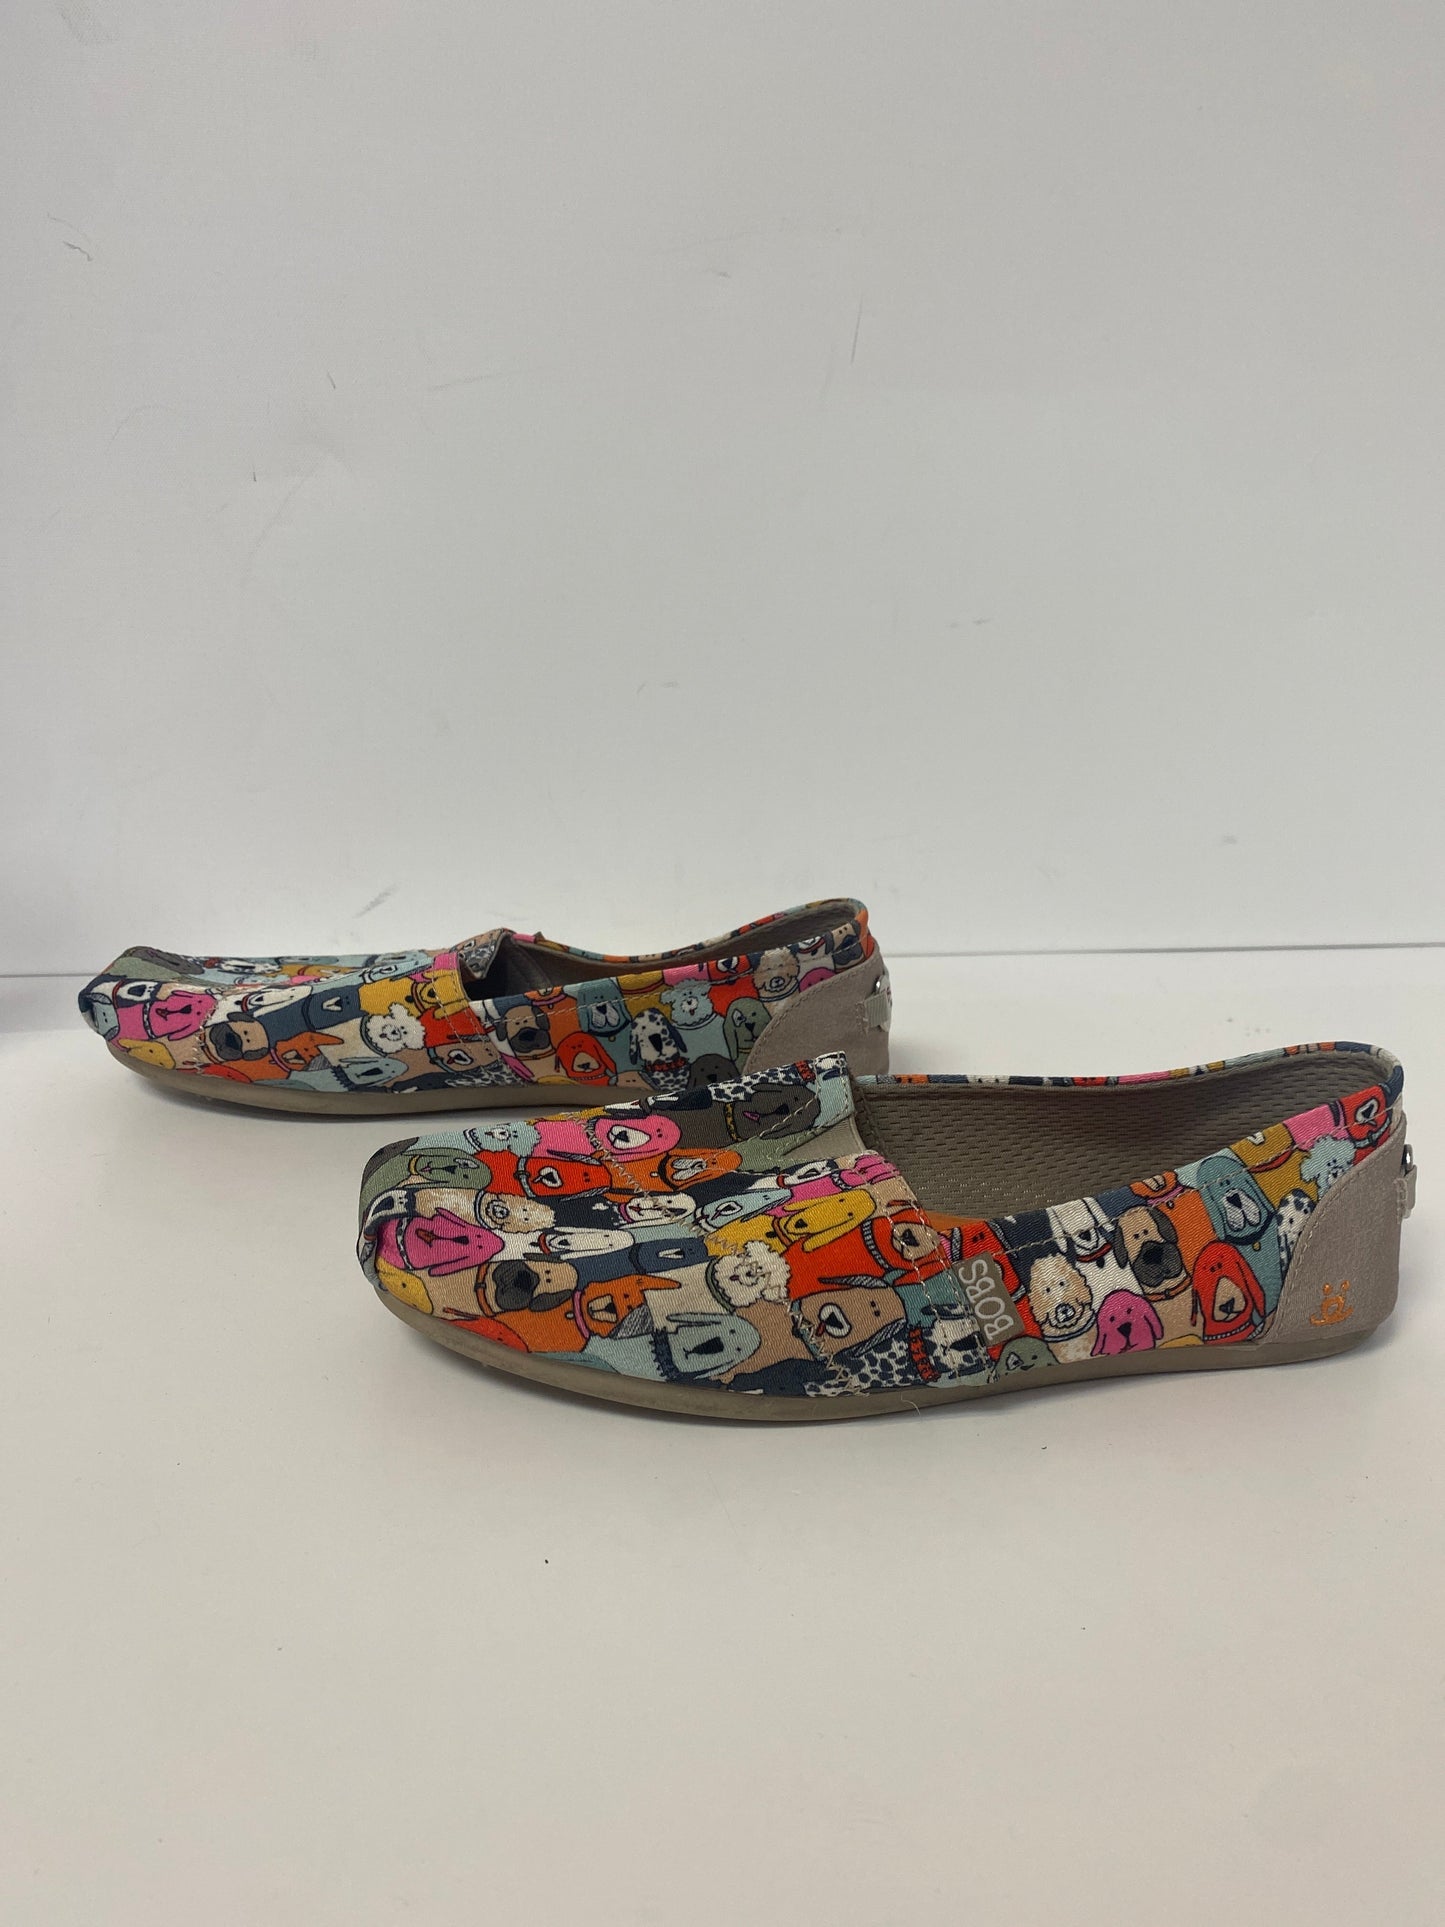 Multi-colored Shoes Flats Bobs, Size 9